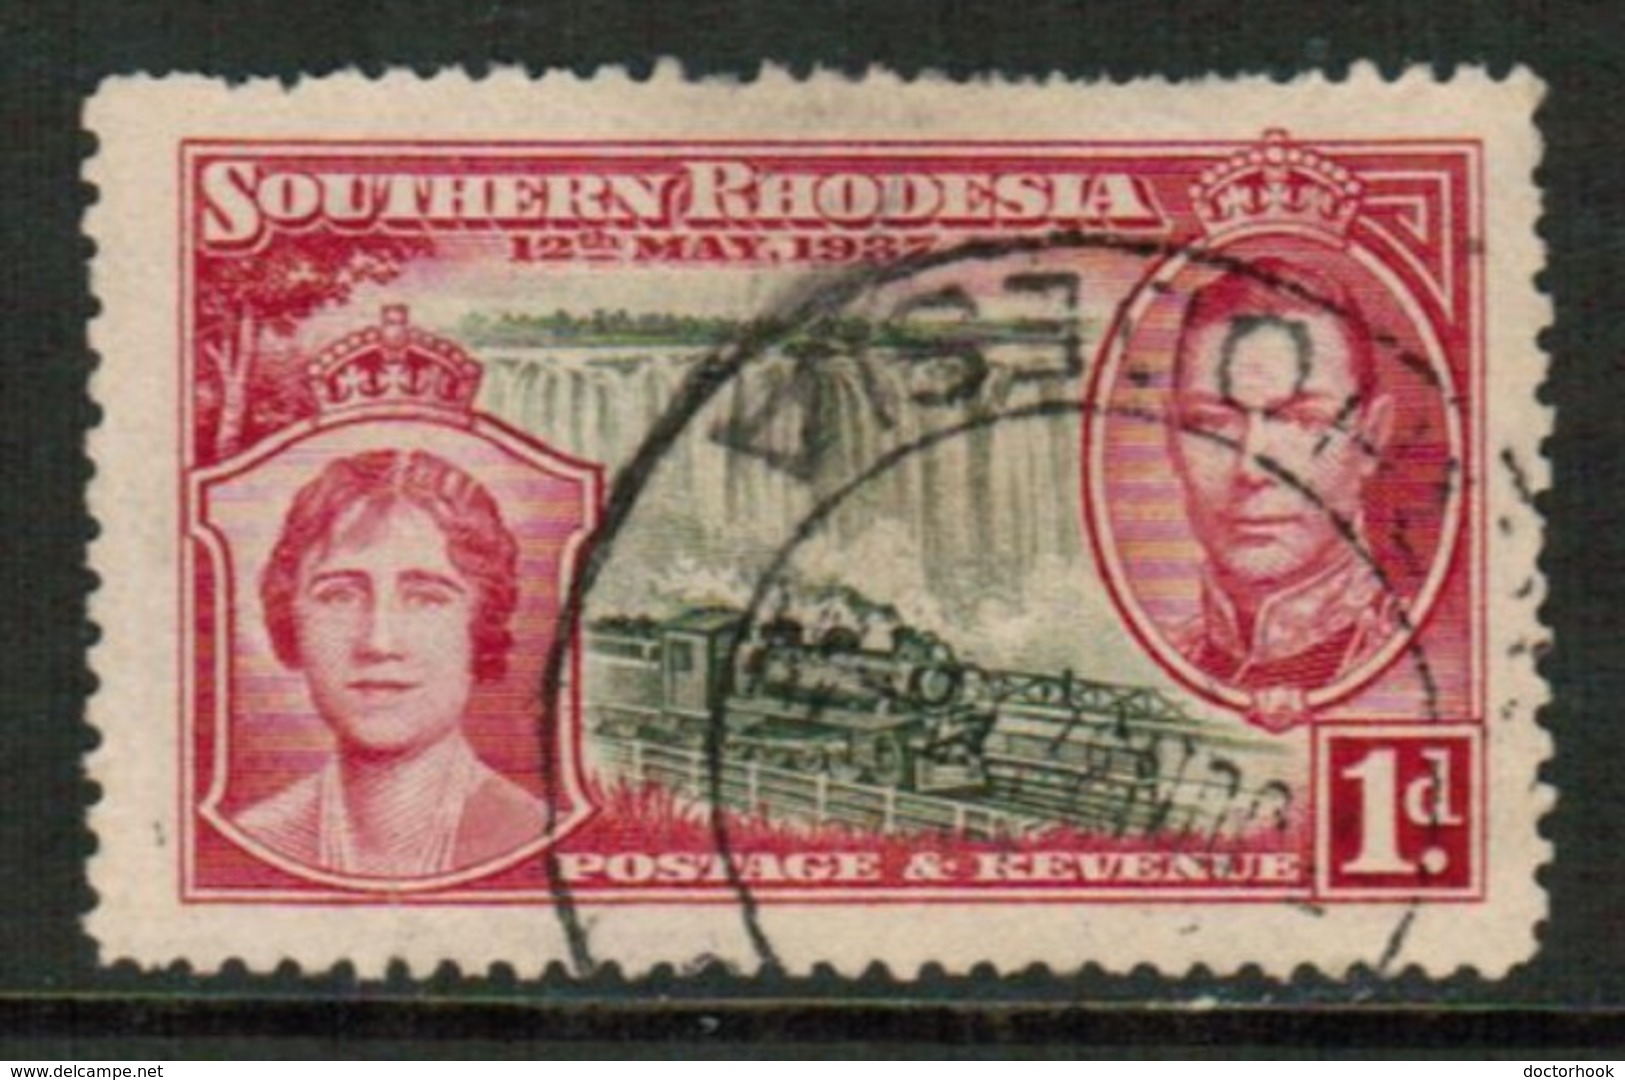 SOUTHERN RHODESIA   Scott # 38 VF USED (Stamp Scan # 434) - Southern Rhodesia (...-1964)